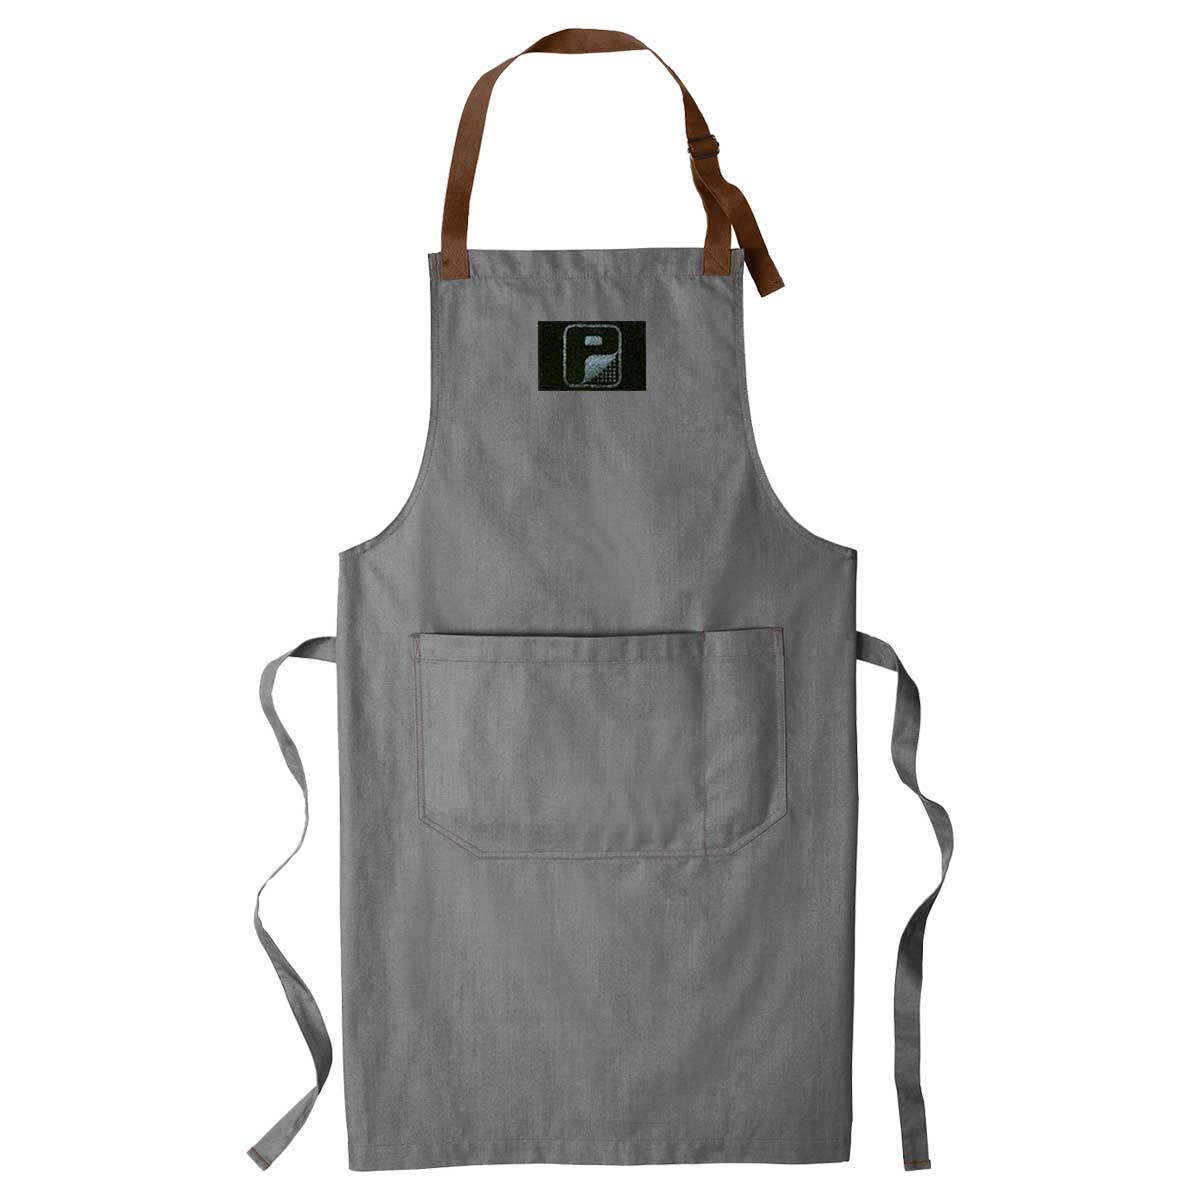 Pull Patch Craftsman Style Full Length BBQ & Baking Apron - Ash Grey - Pull Patch - Removable Patches That Stick To Your Gear